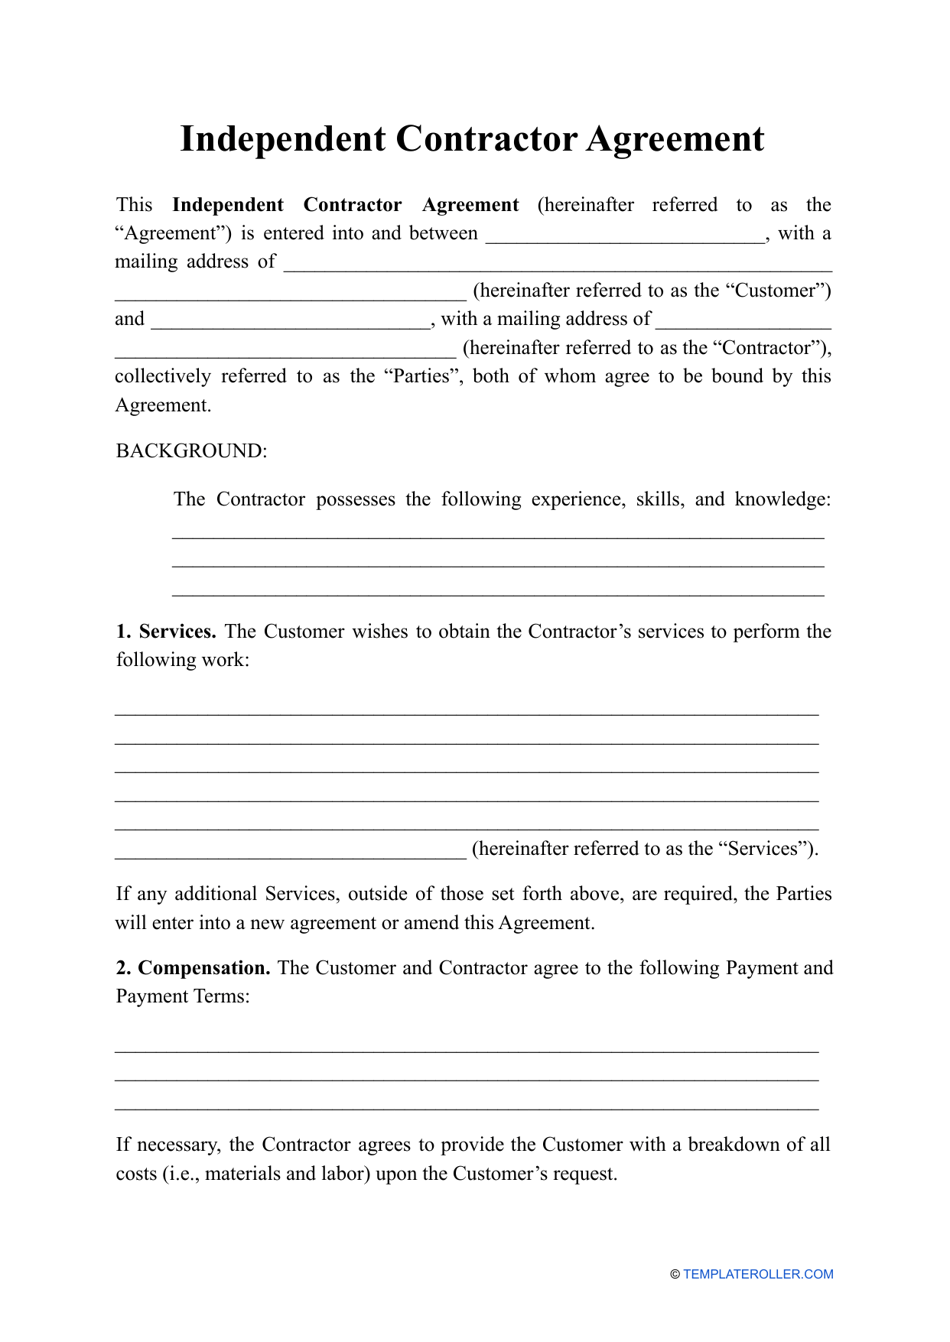 independent-contractor-agreement-template-download-printable-pdf